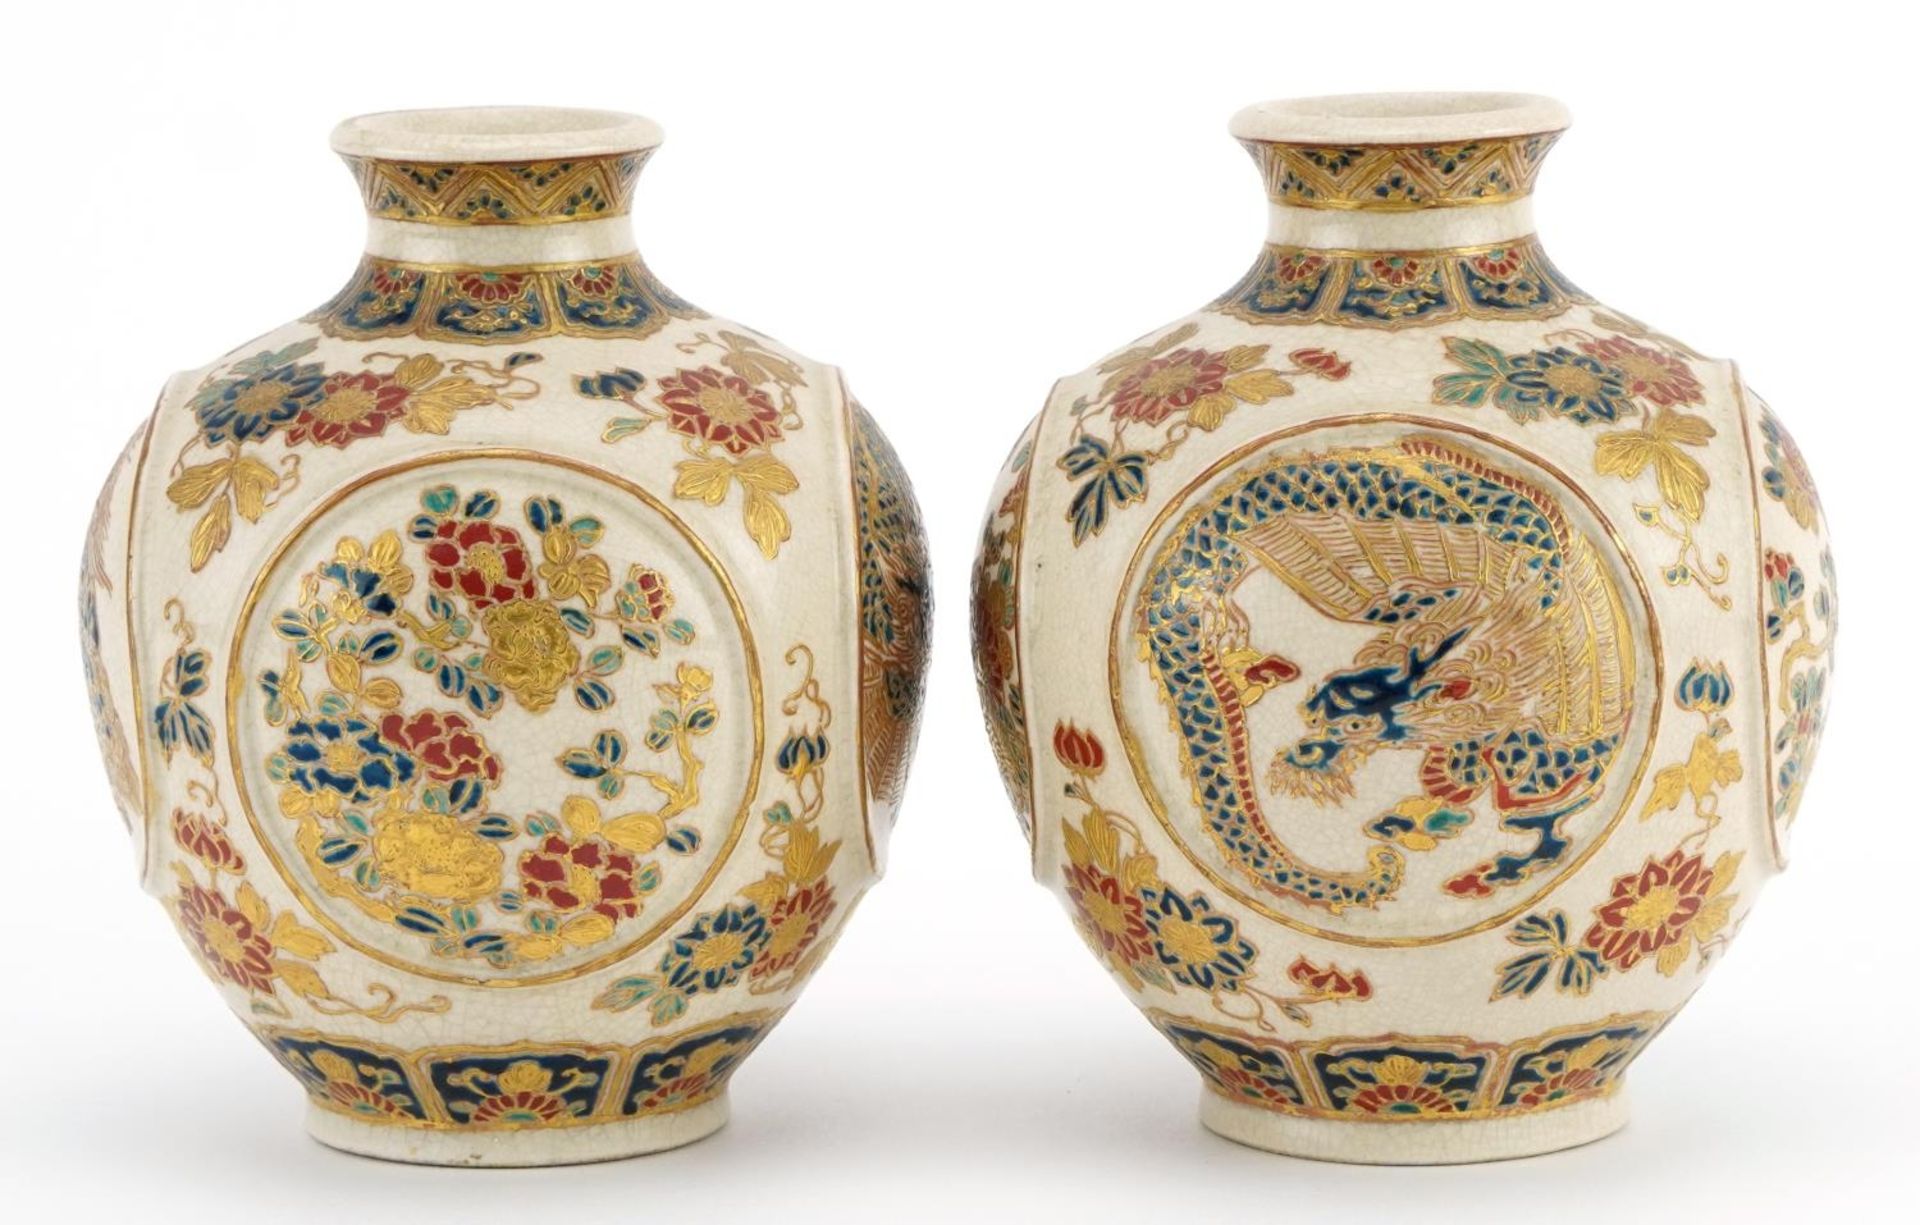 Pair of Japanese Satsuma pottery vases finely gilded with panels of dragons and flowers, character - Image 5 of 6